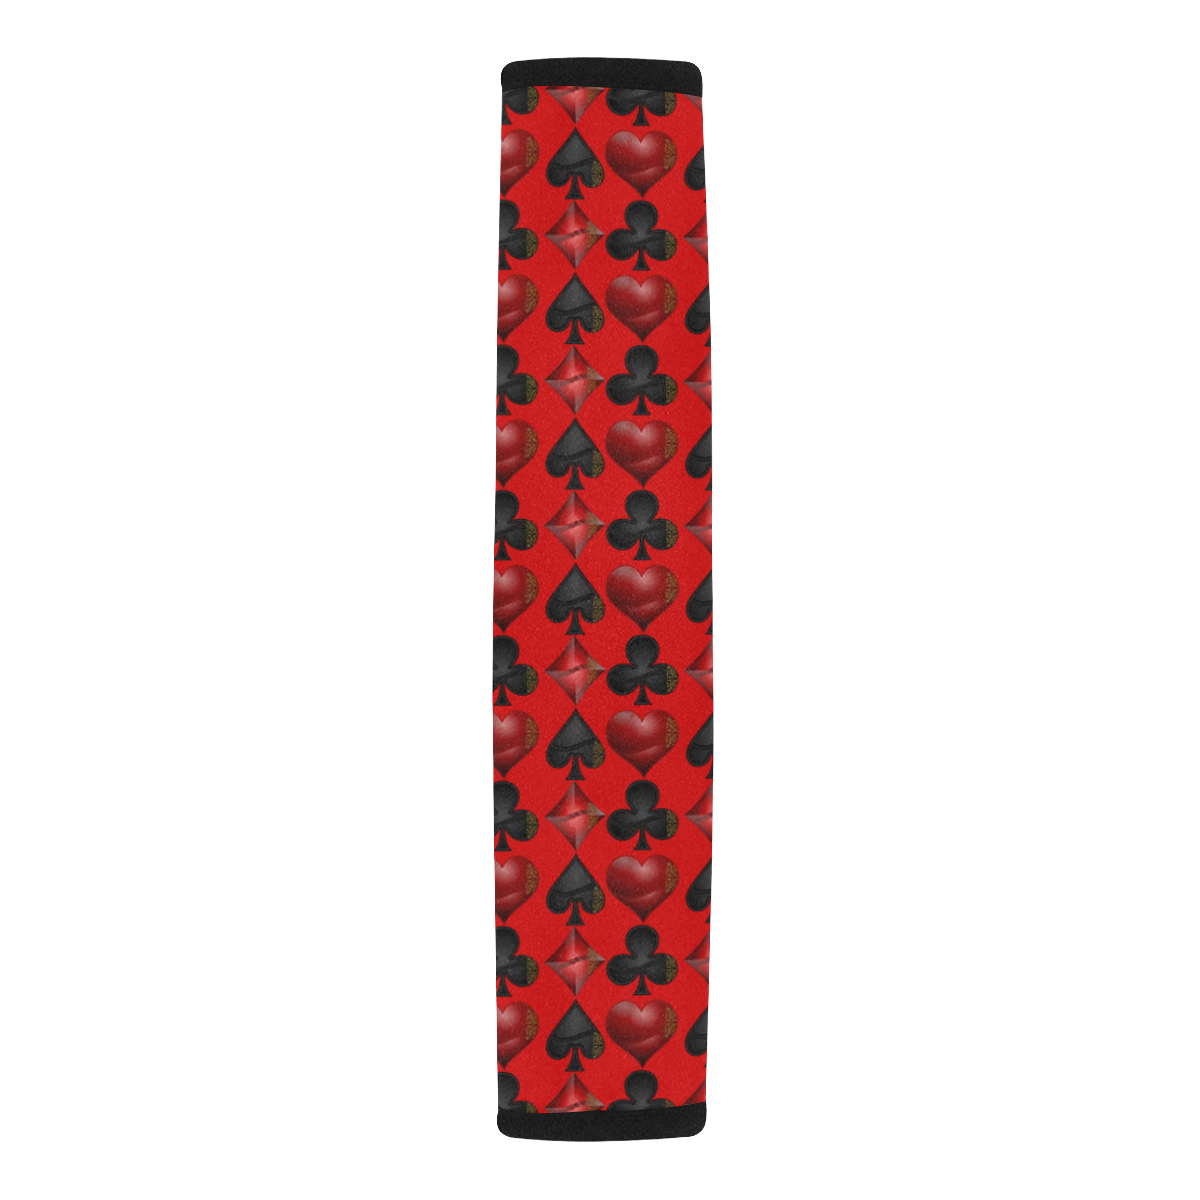 Las Vegas Black and Red Casino Poker Card Shapes on Red Car Seat Belt Cover 7''x12.6''